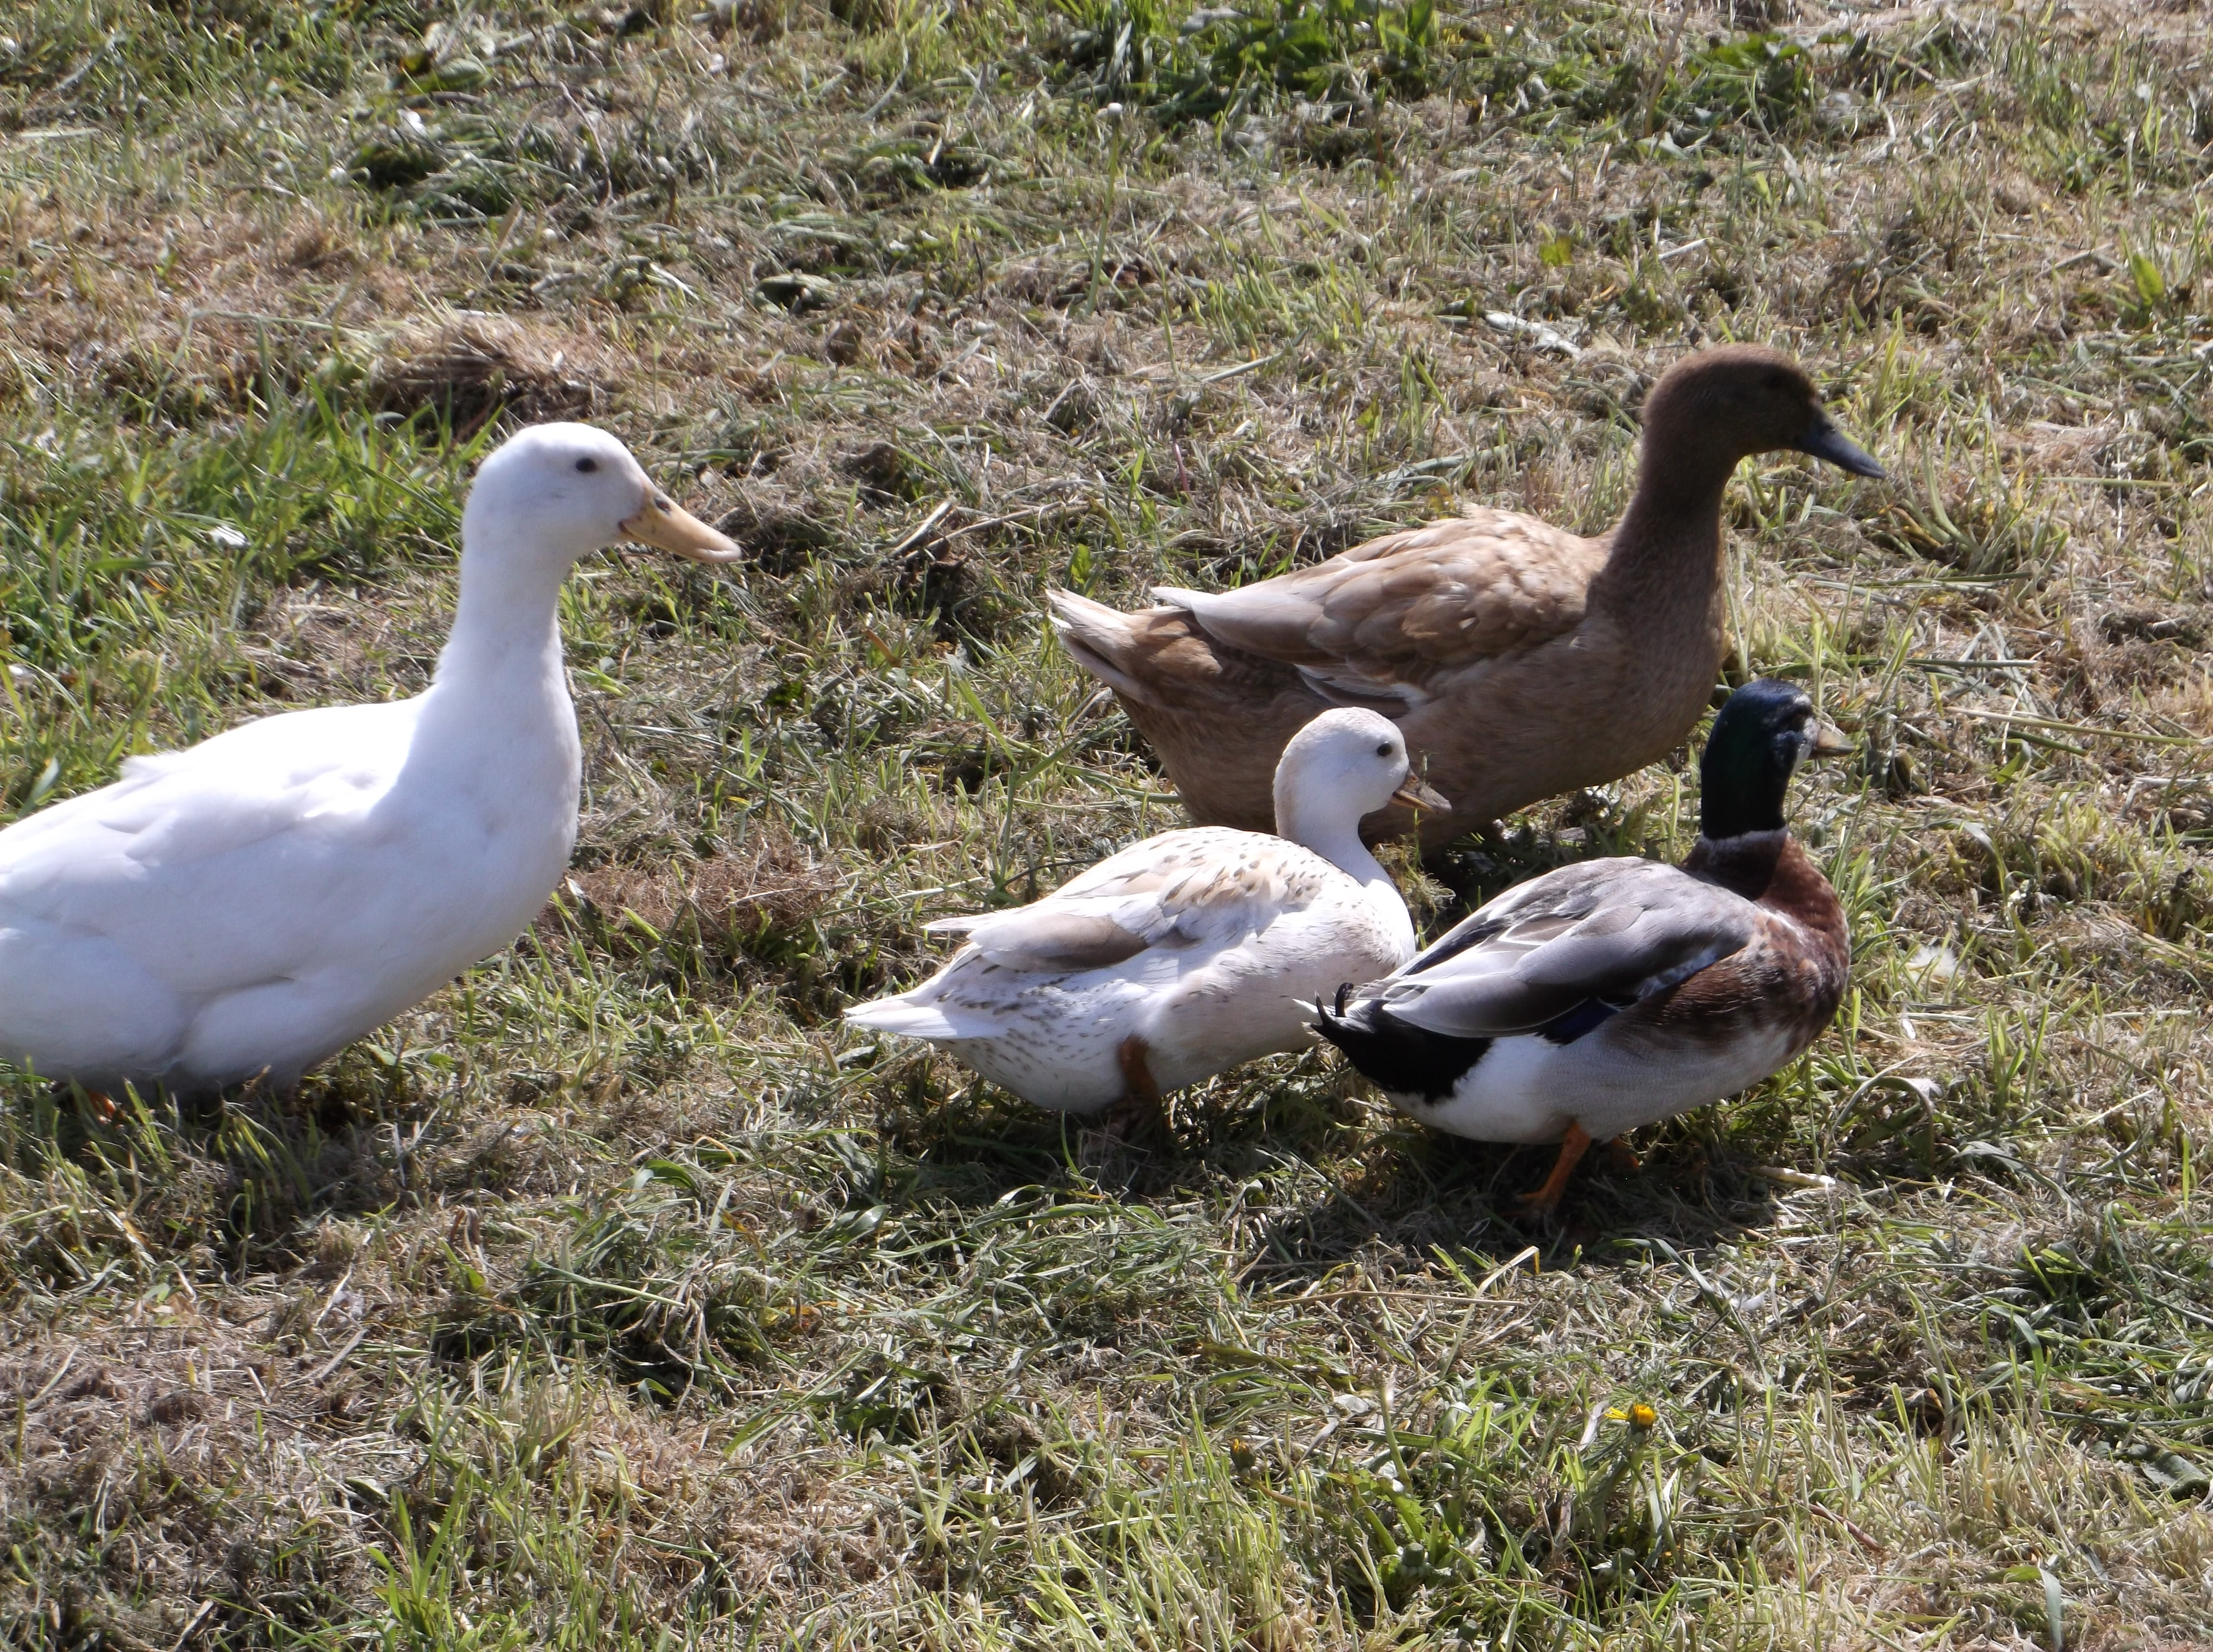 Our duckies, one aylesbury, two miniature Silver Appleyards, and two Khaki Campbells.